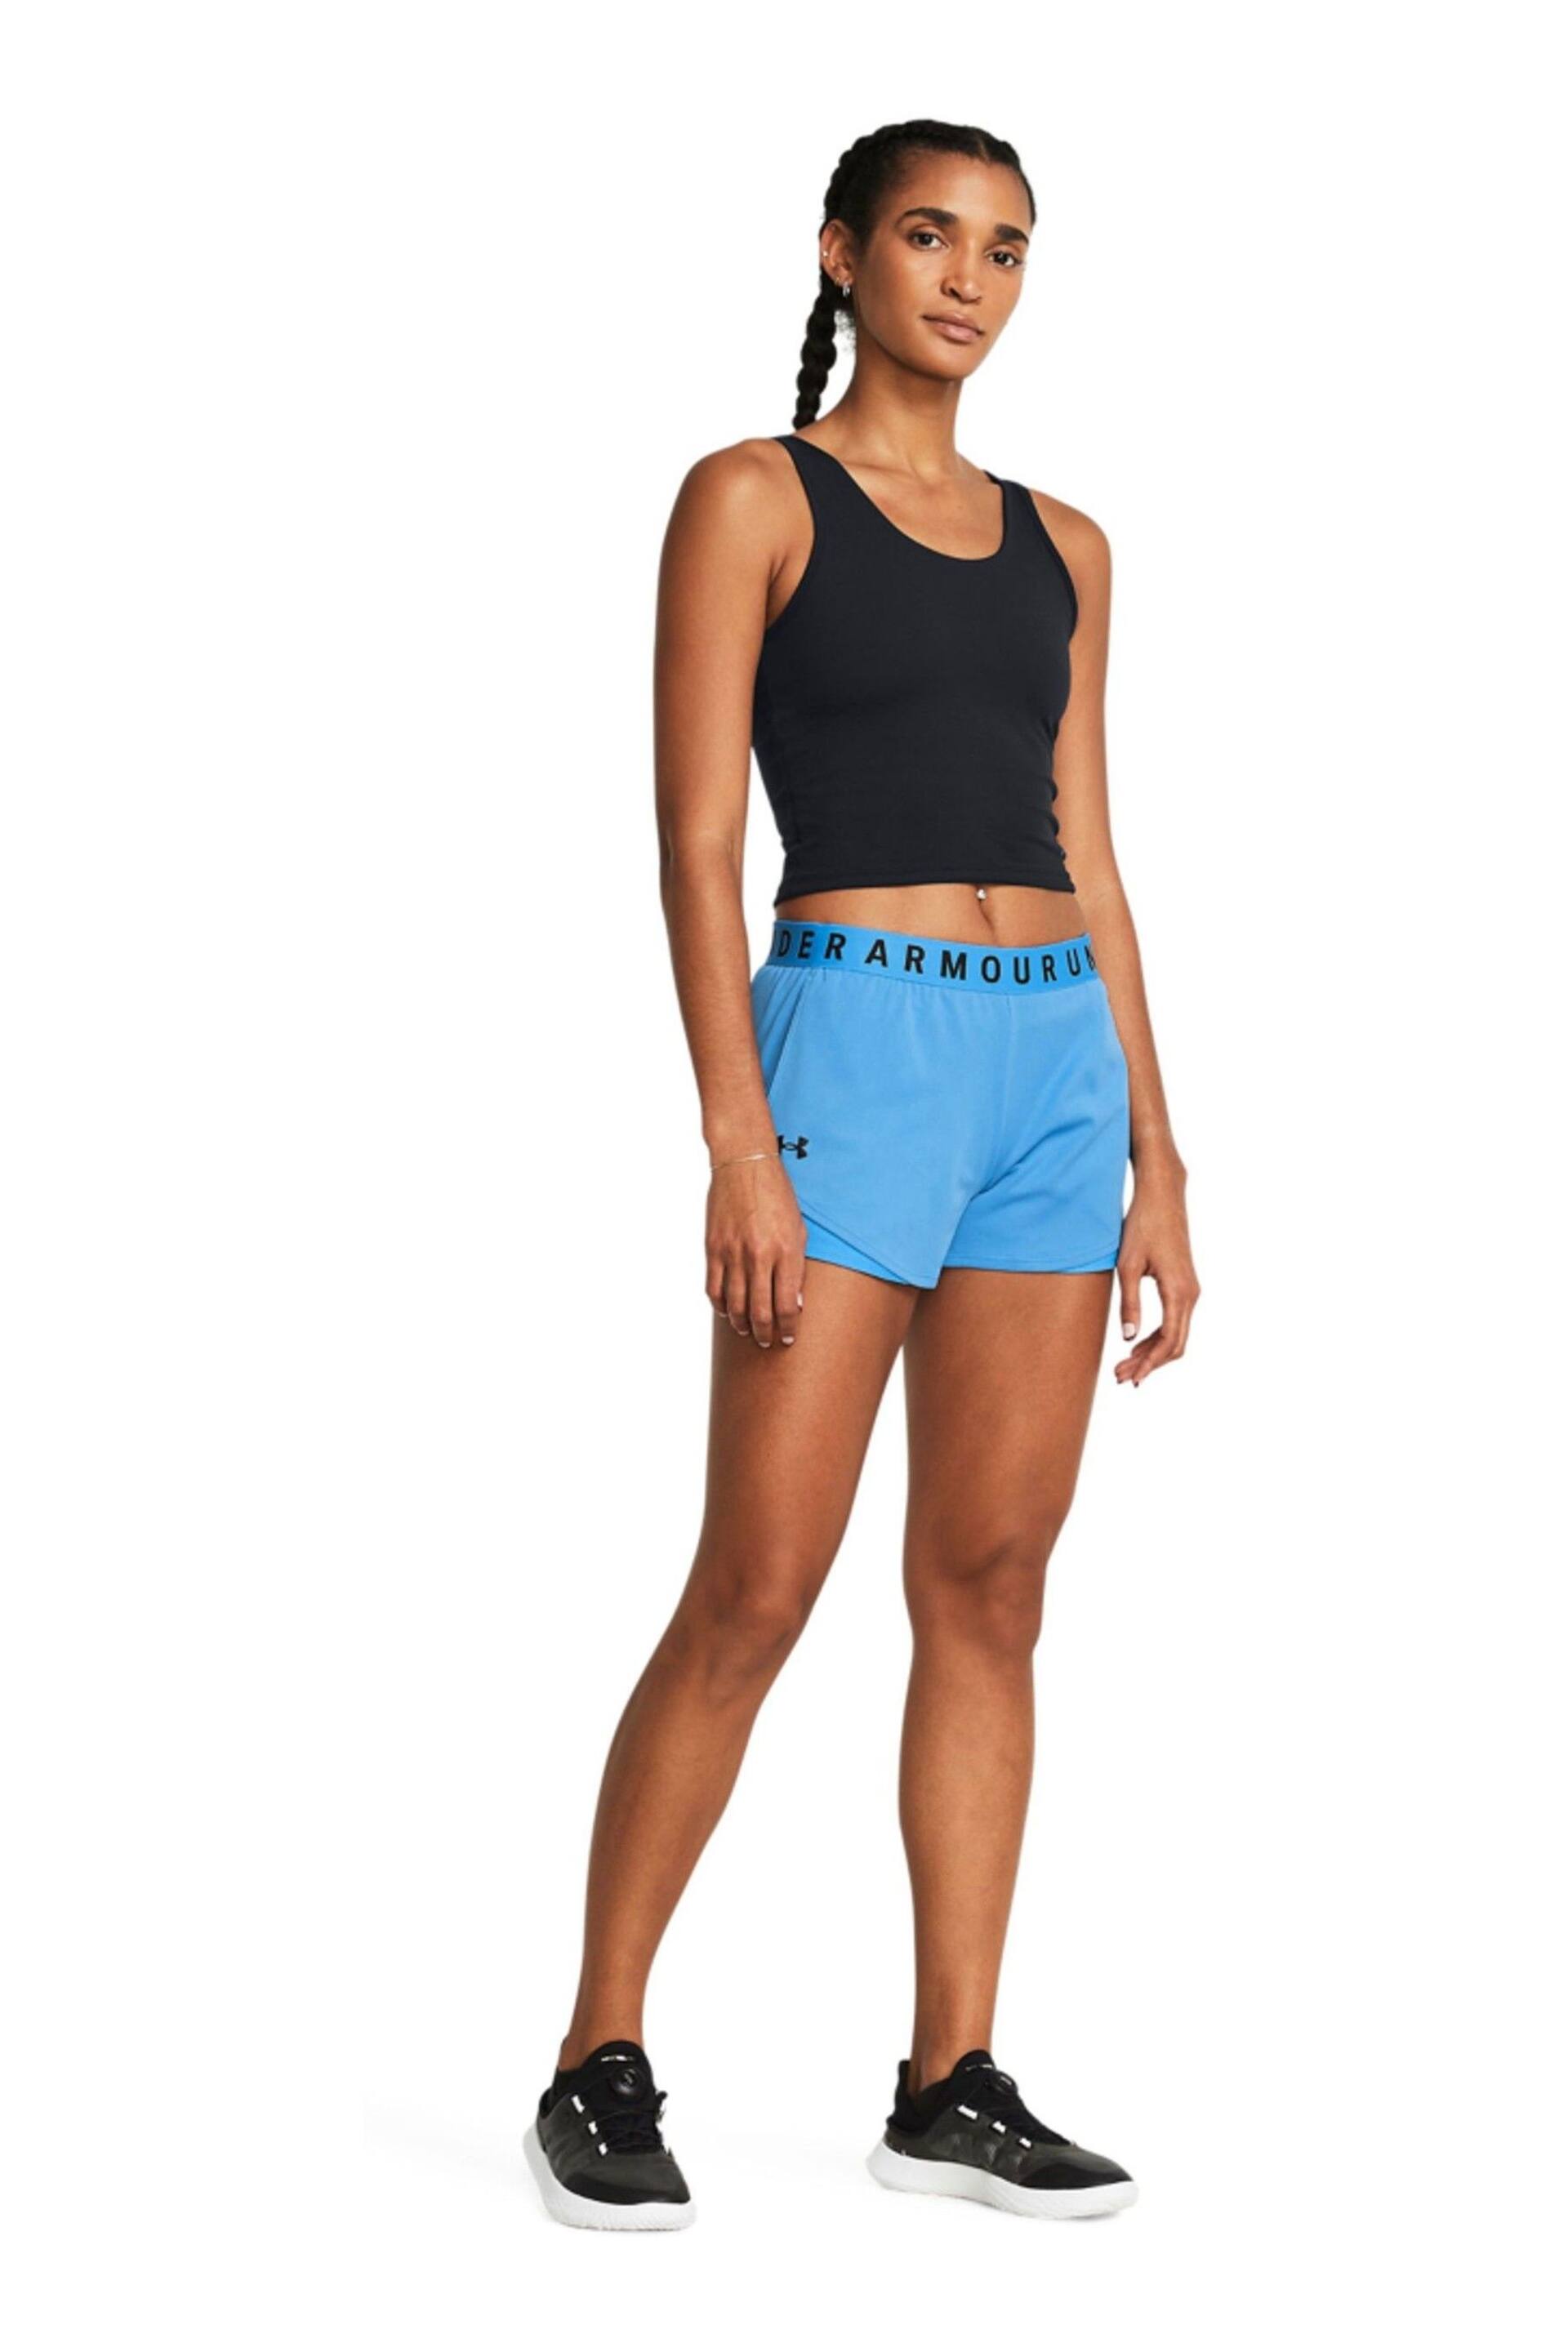 Under Armour Blue Play Up Shorts - Image 3 of 6